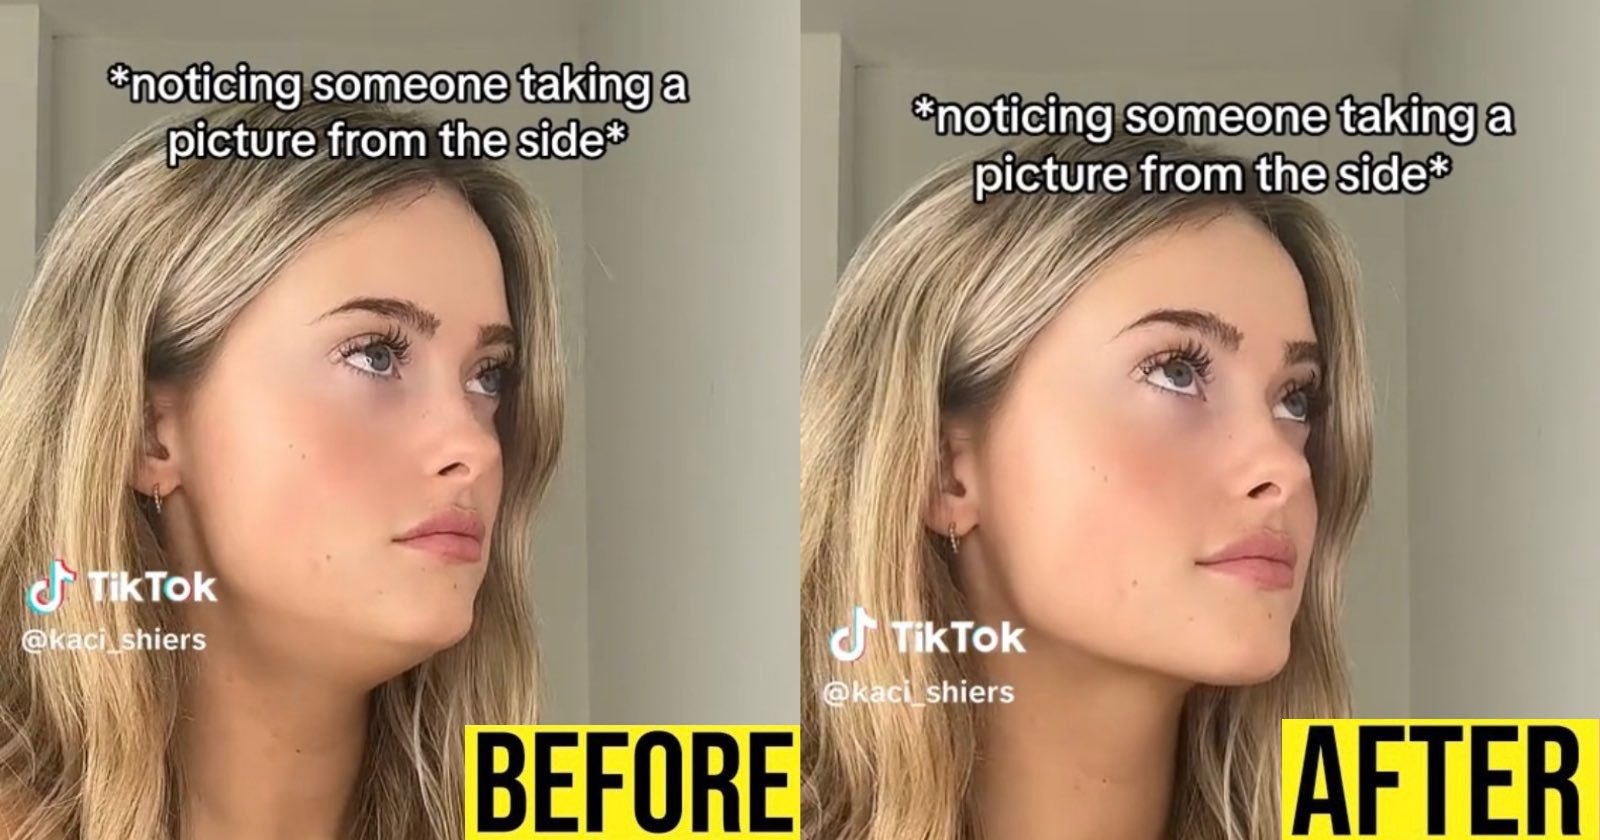 An influencer is claiming that mewing is the secret to getting a good photo from the side -- and photographers may want to learn about the latest viral TikTok posing trend.